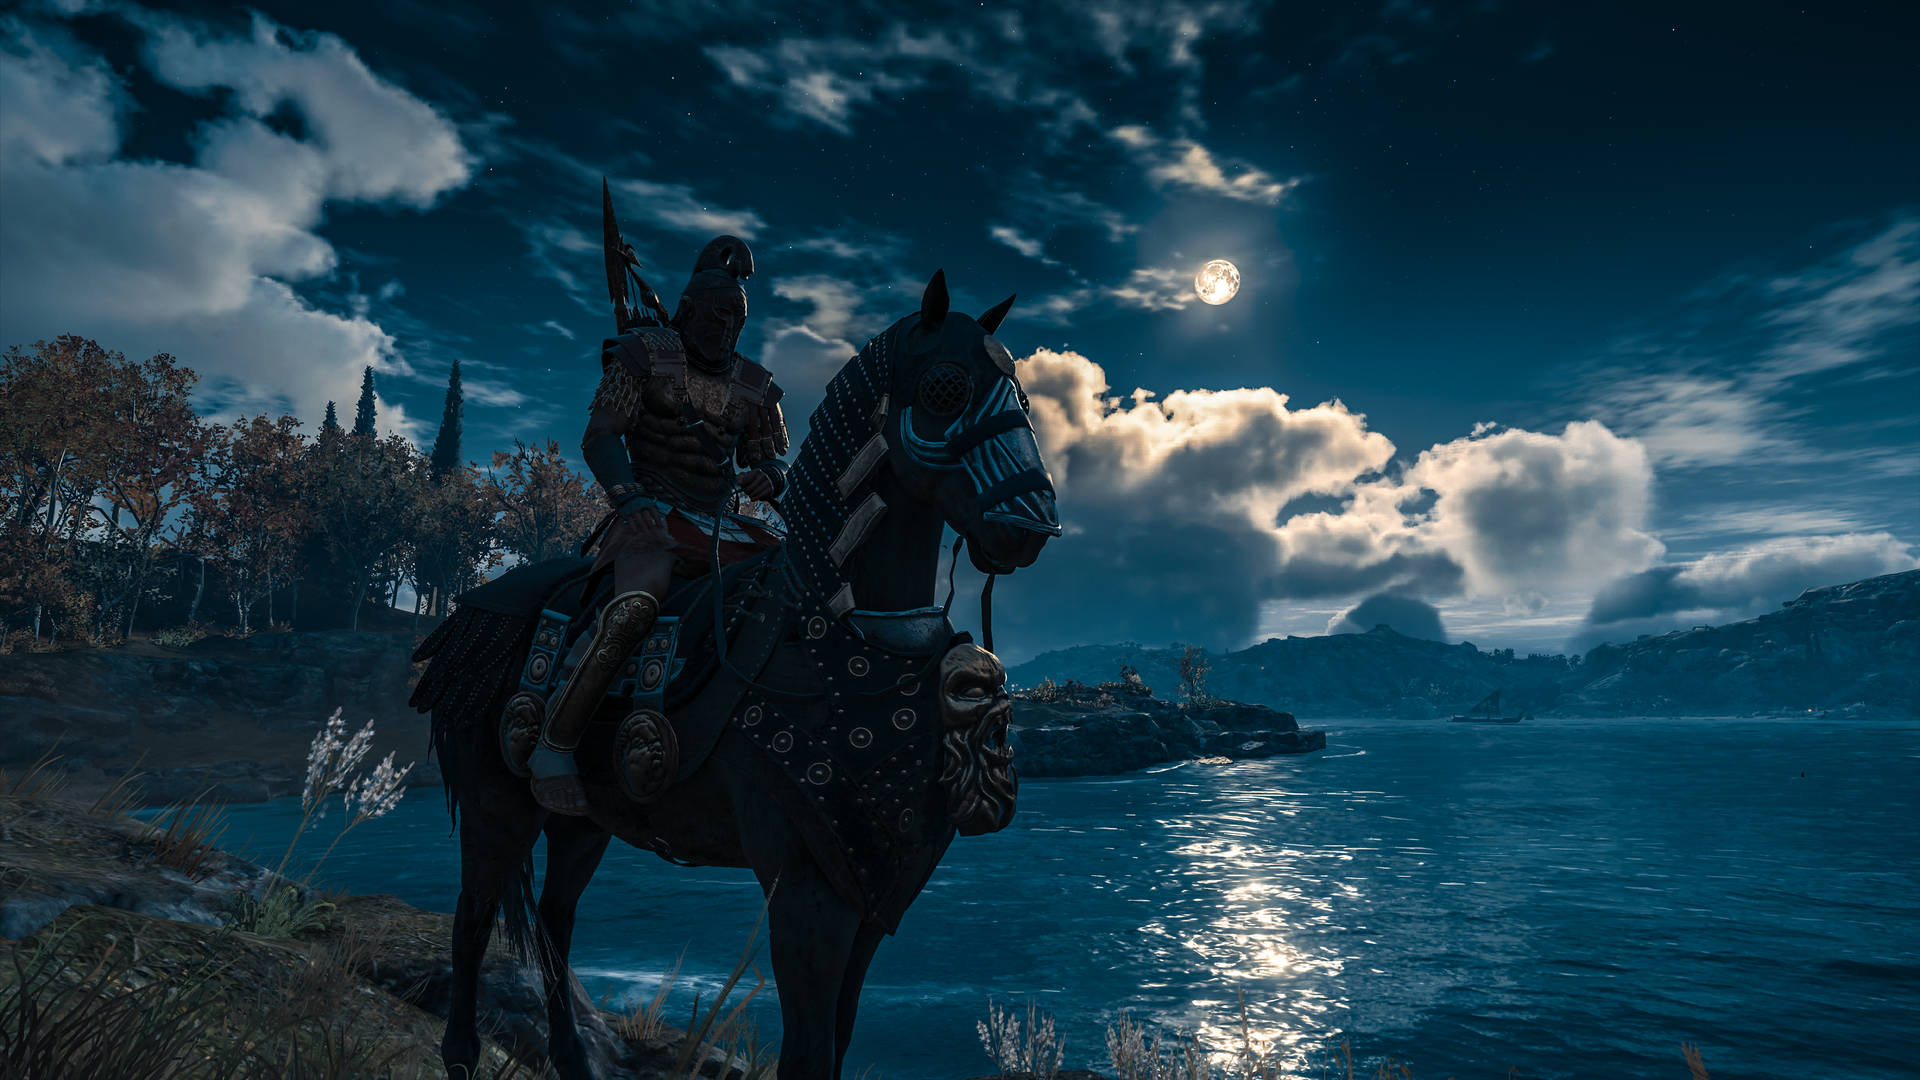 Assassin's Creed Alexios On Horse Wallpaper